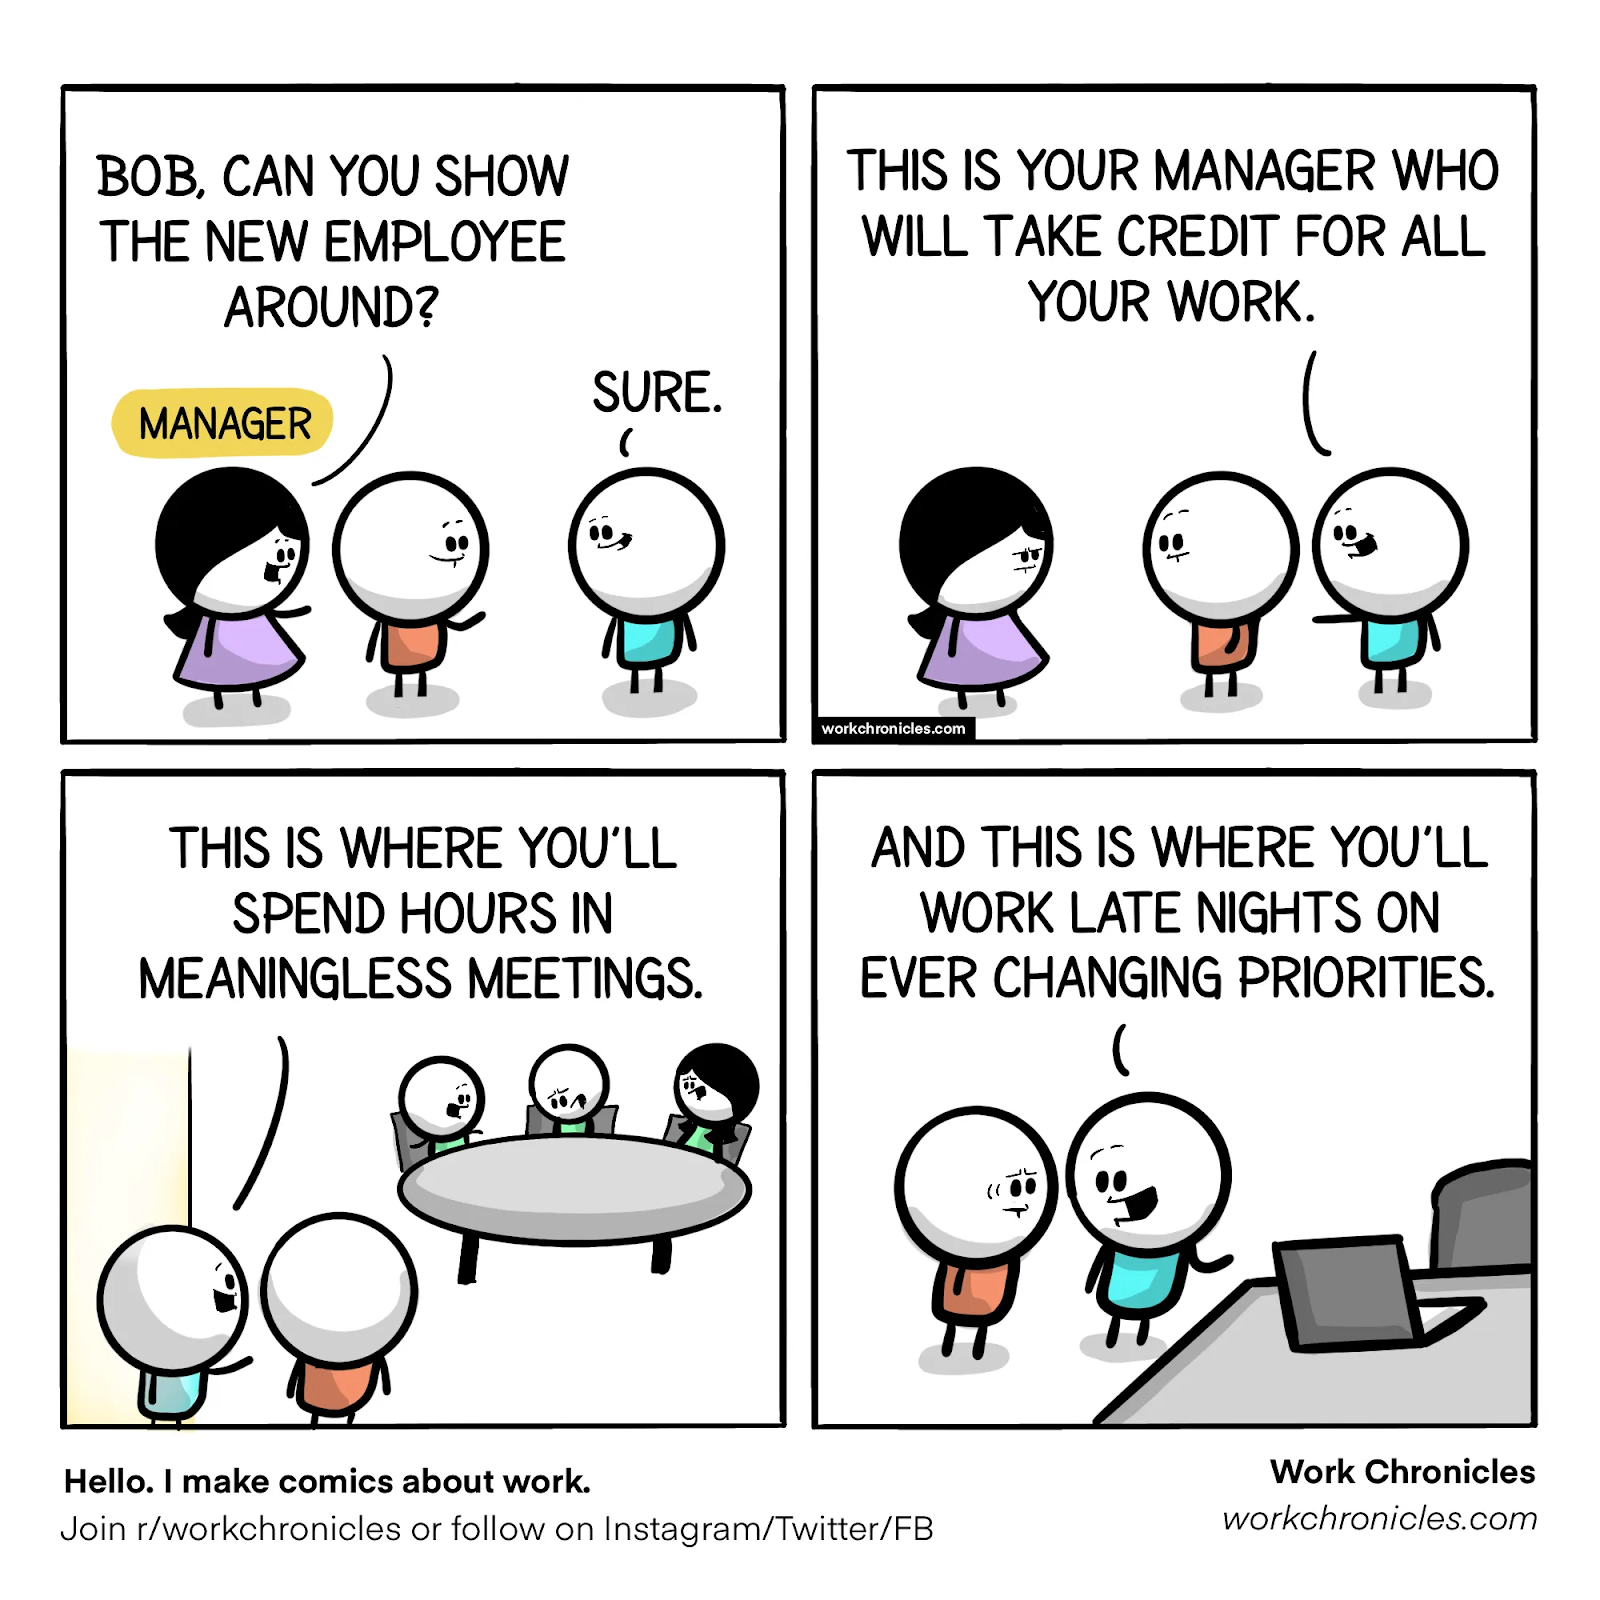 THIS IS YOUR MANAGER WHO 
BOB, CAN YOU SHOW 
WILL TAKE CREDIT FOR ALL 
THE NEW EMPLOYEE 
YOUR WORK. 
AROUND? 
SURE. 
(YAN G 
e 99 
workchronicles.com 
AND THIS IS WHERE YOU'LL 
THIS IS WHERE YOU'LL 
WORK LATE NIGHTS ON 
SPEND HOURS IN 
EVER CHANGING PRIORITIES. 
99 
Hello. I make comics about work. 
Join r/workchronicles or follow on Instagram/Twitter/FB 
Work Chronicles 
workchronic/es.com 